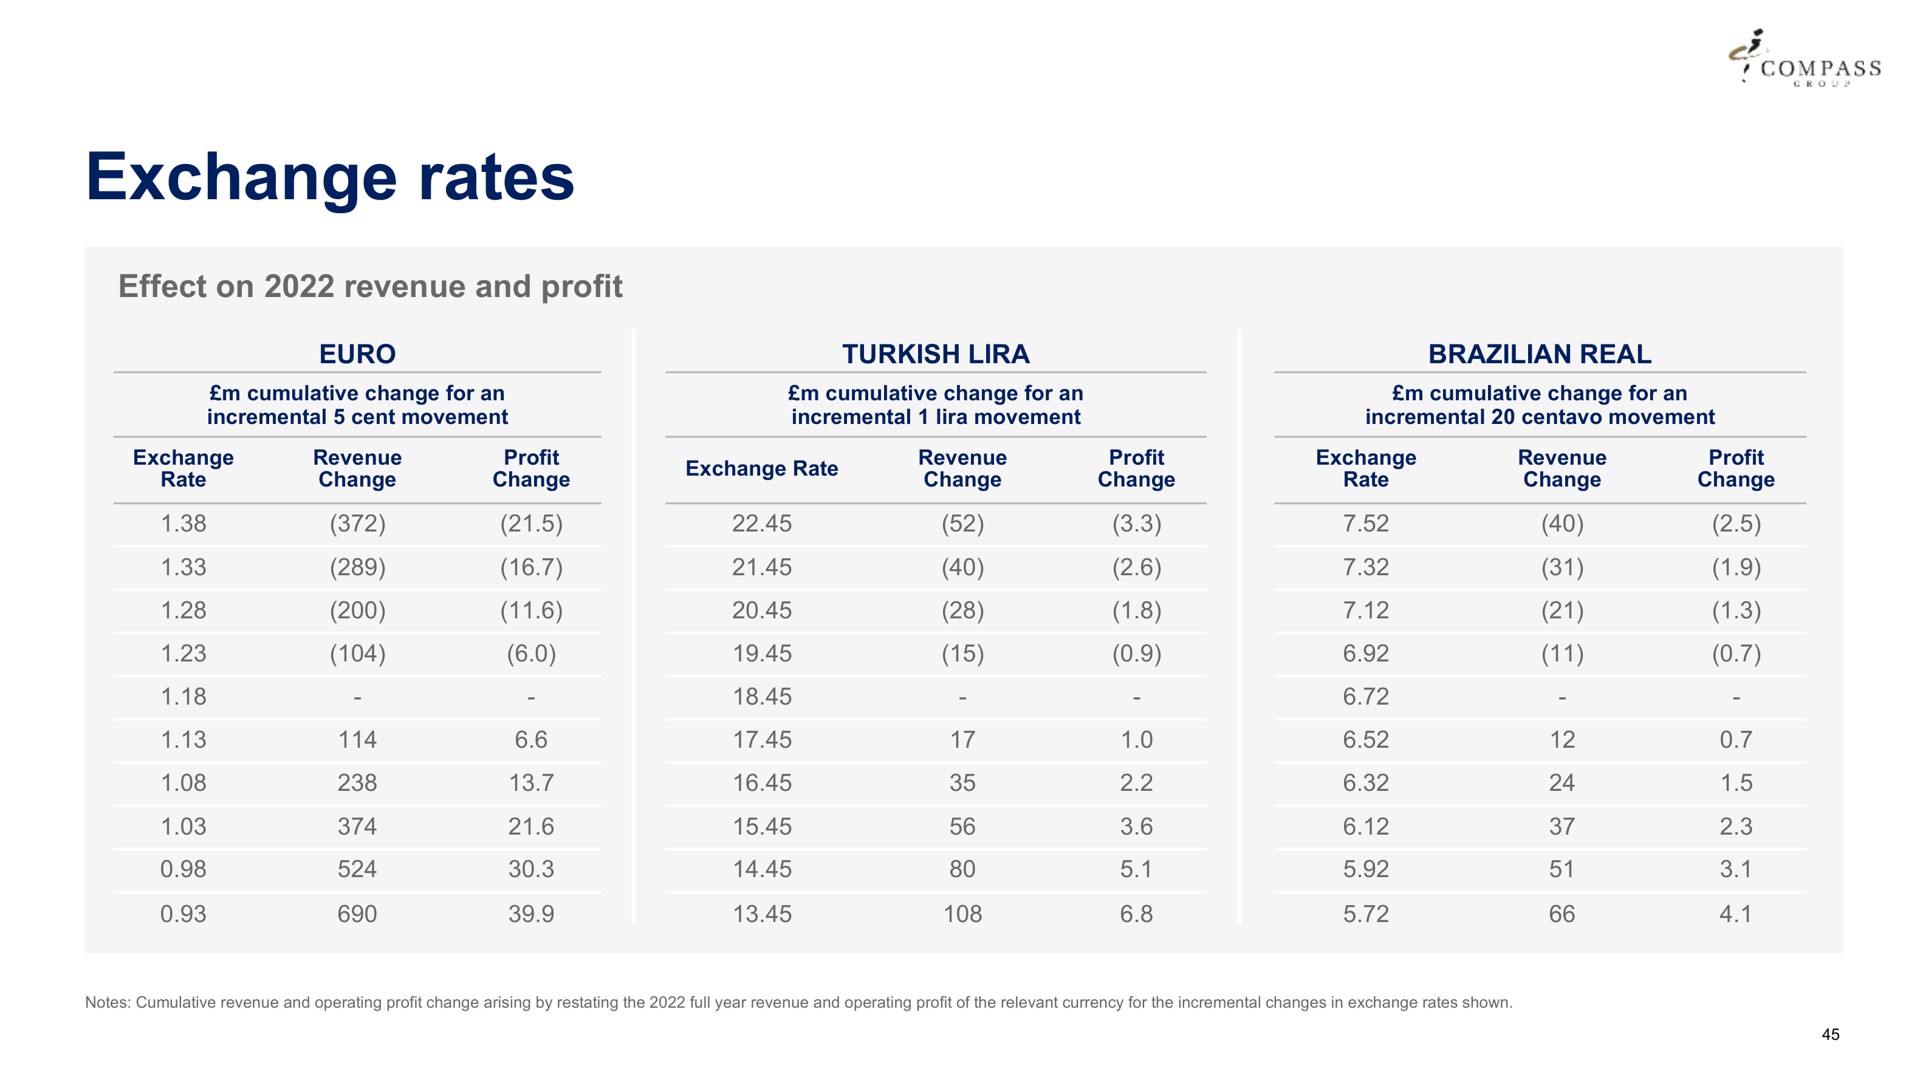 exchange rates effect on revenue and profit lira cot a compass real | Compass Group